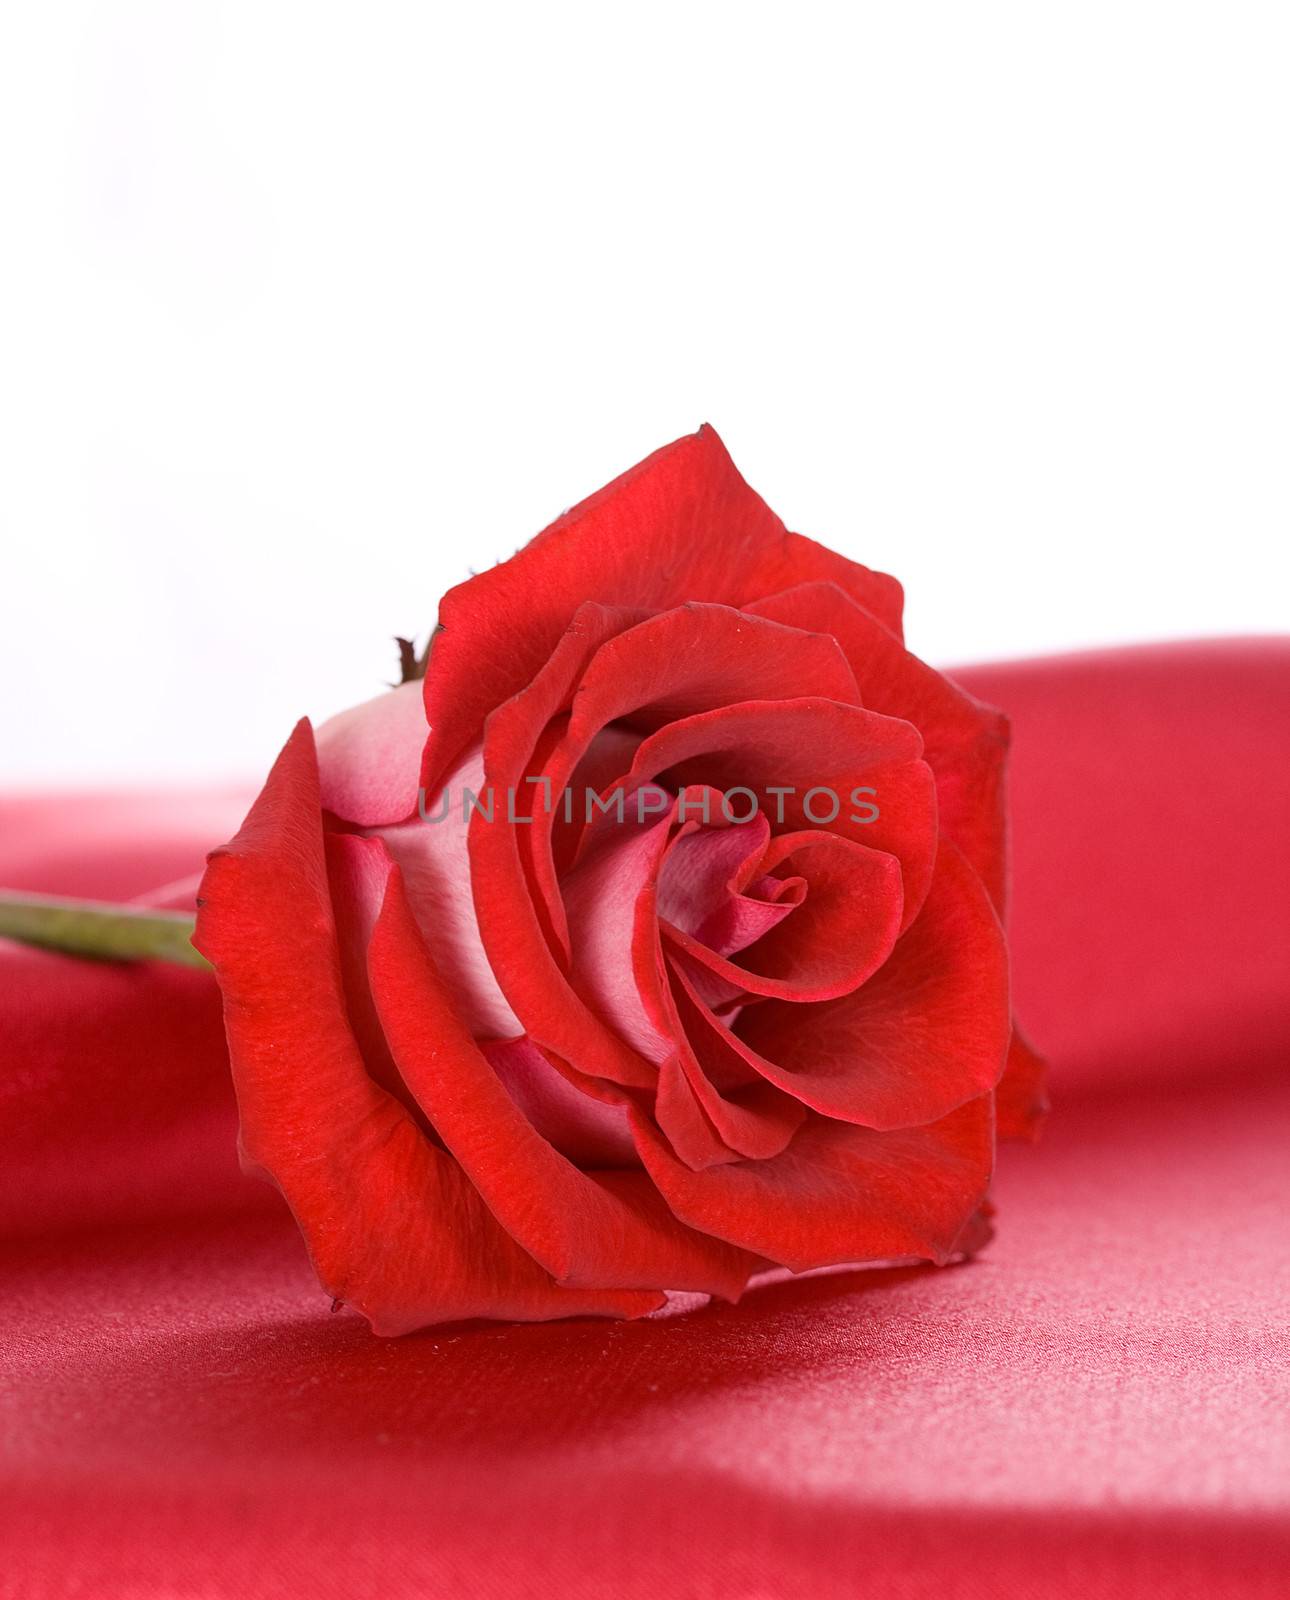 red rose on red silk isolated on white background